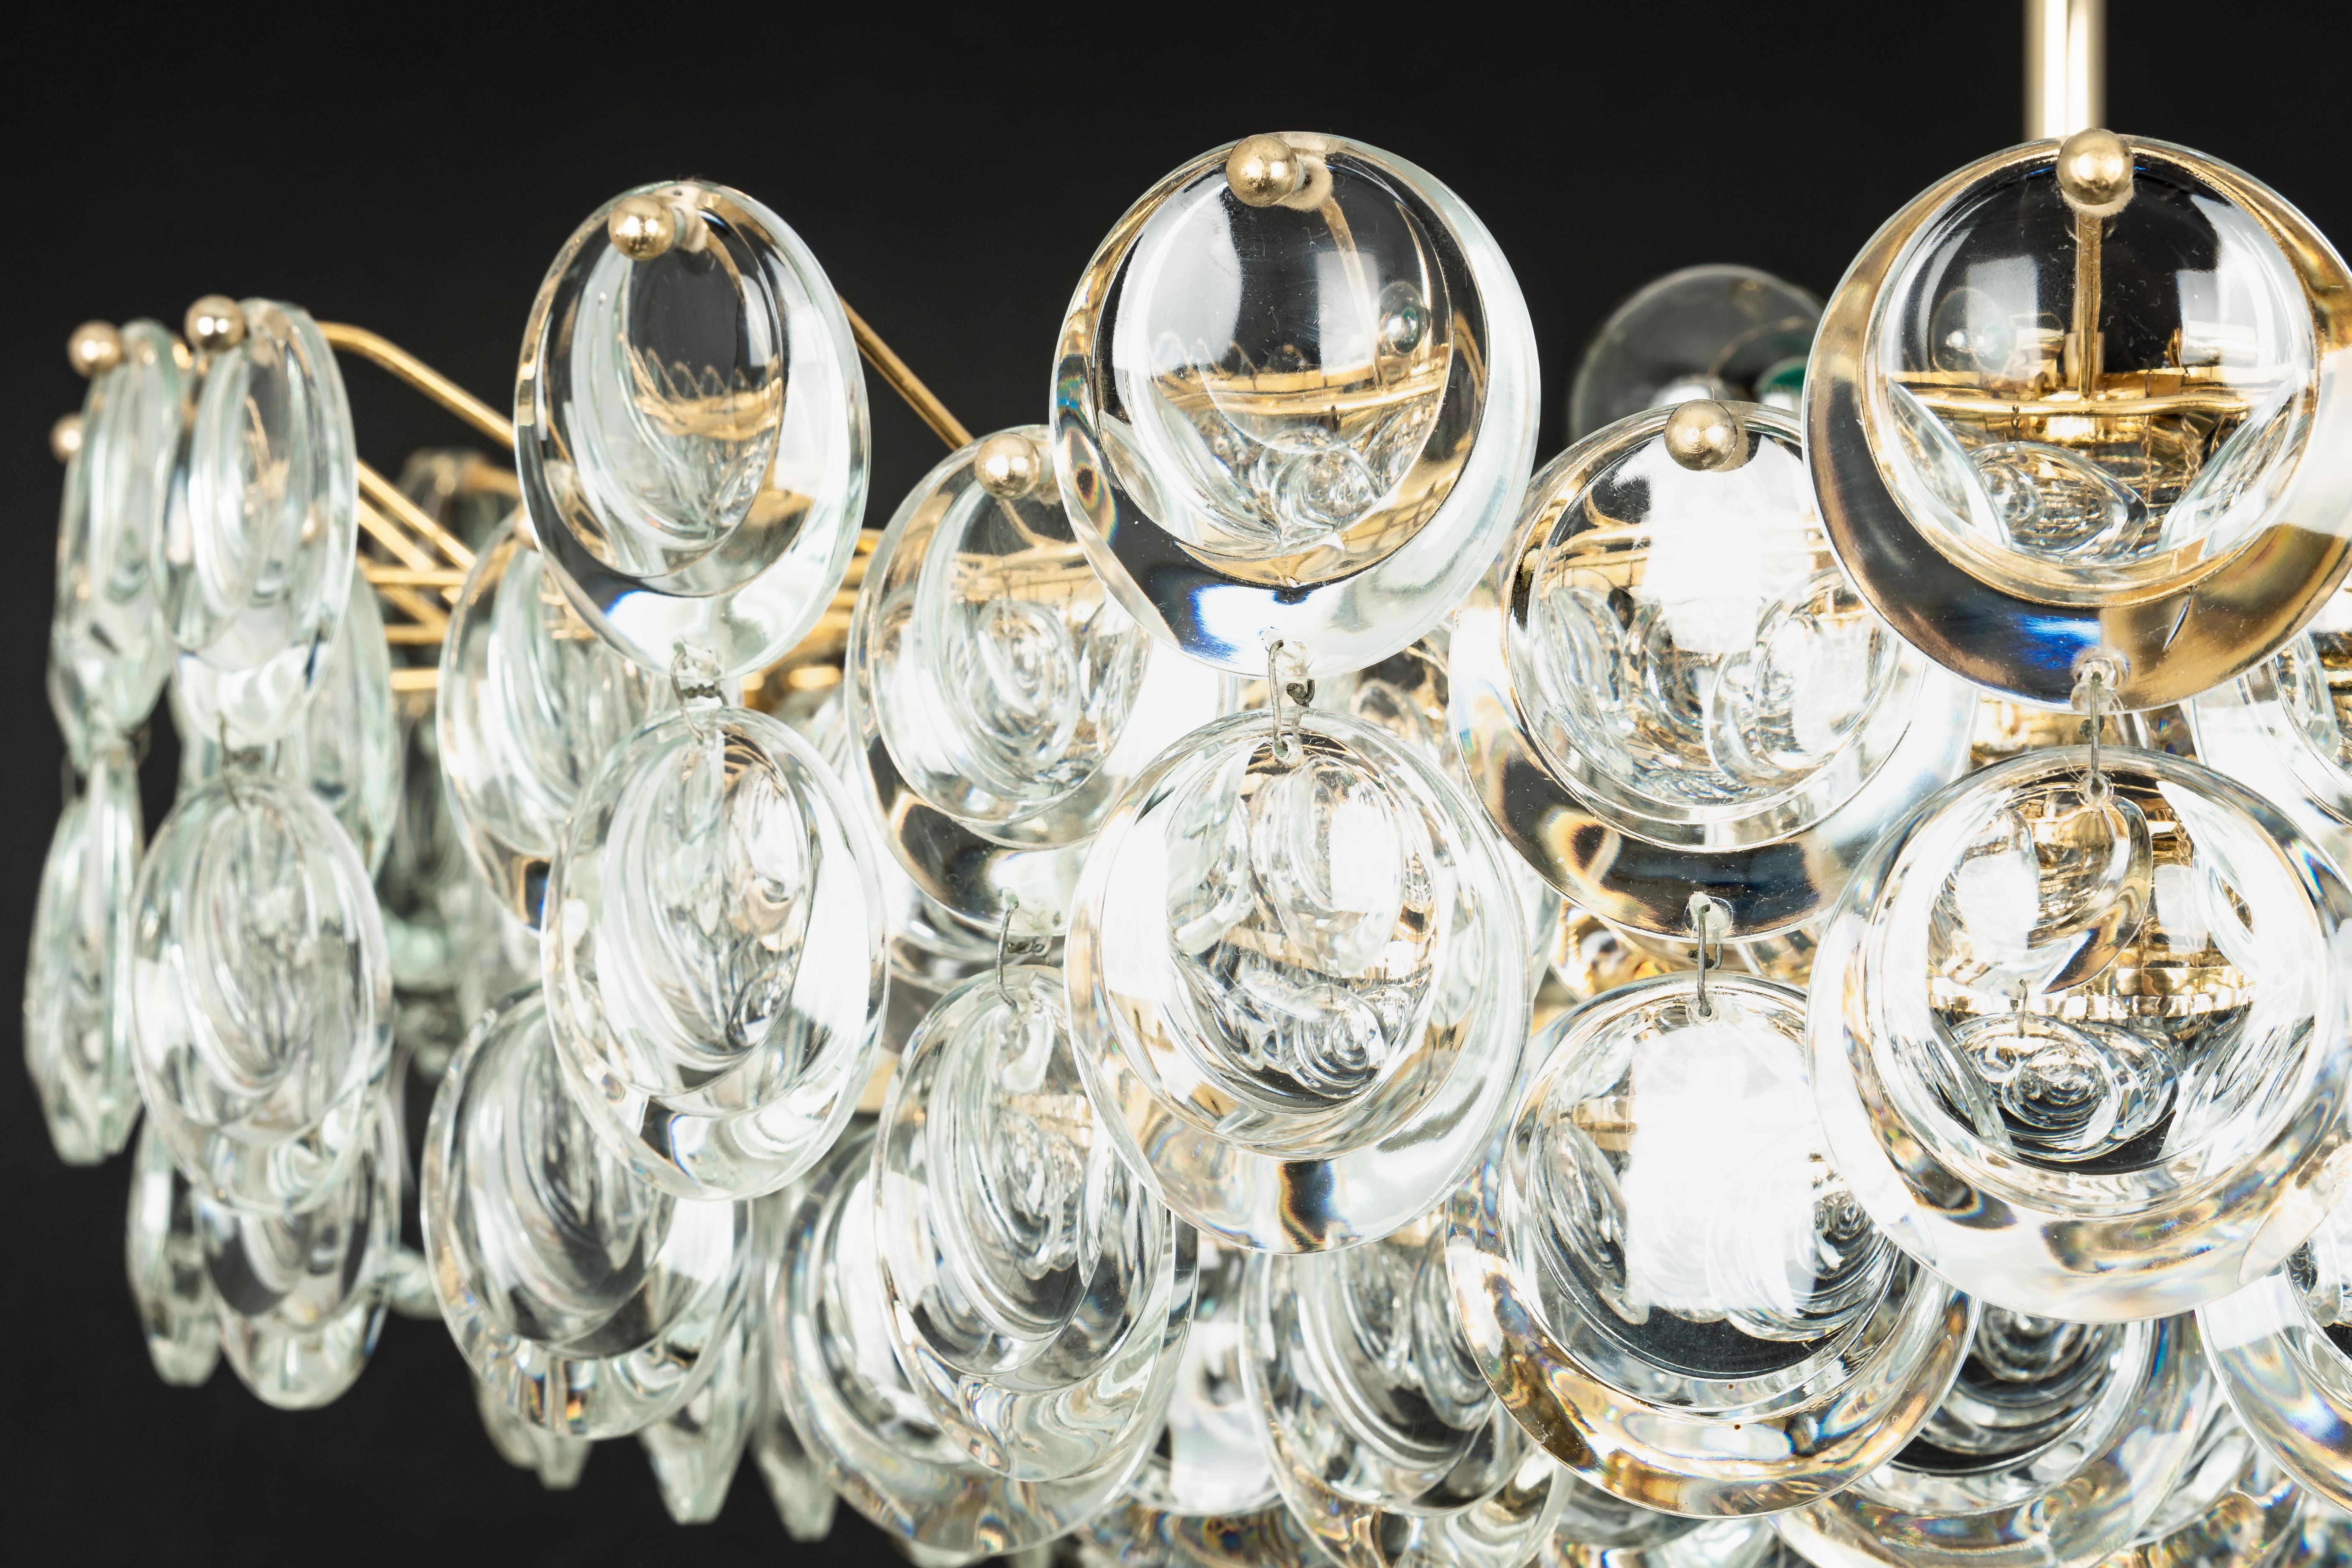 Huge Gilt Brass and Crystal Chandelier, Sciolari Design by Palwa, Germany, 1970s For Sale 1